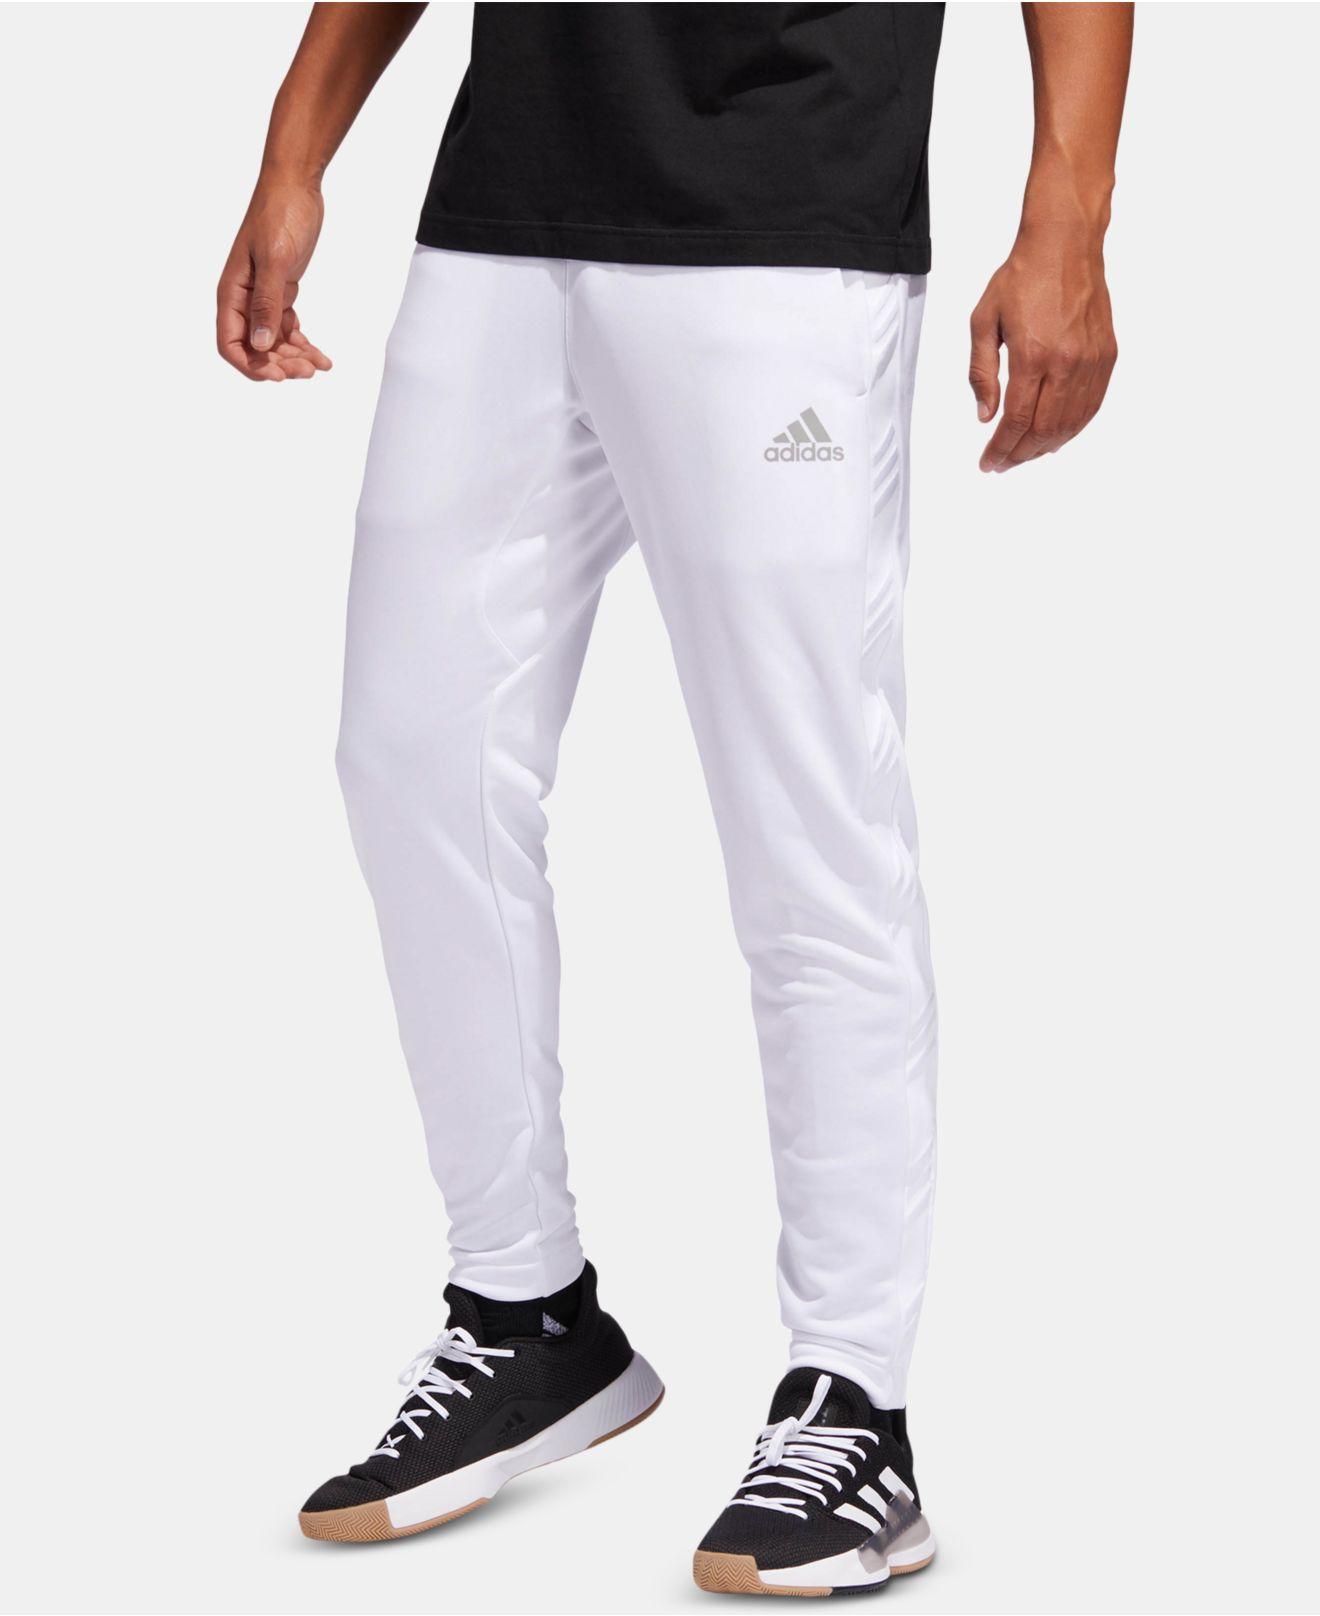 adidas Climalite® Logo Pants in White for Men - Lyst